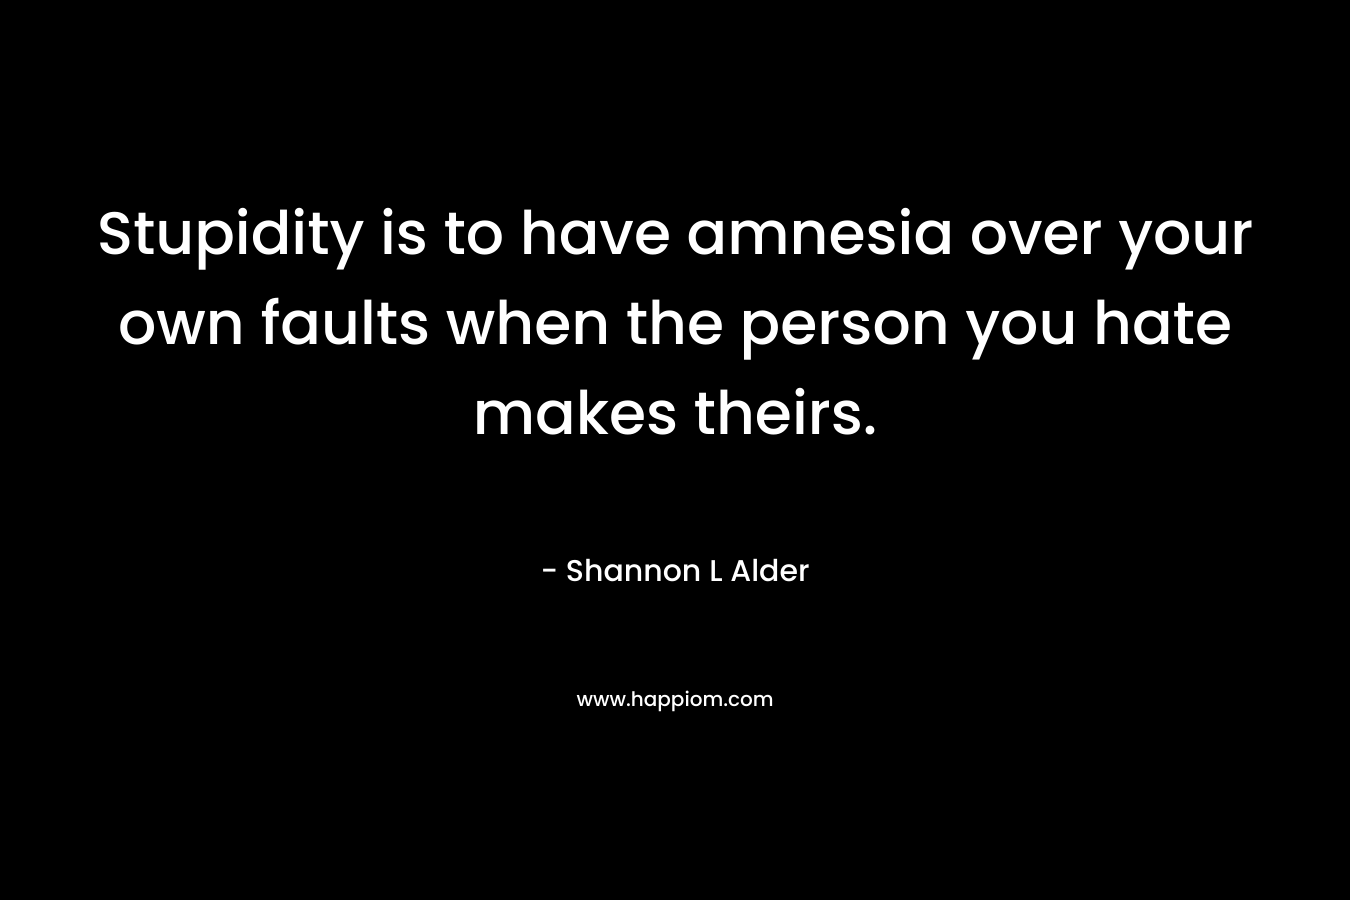 Stupidity is to have amnesia over your own faults when the person you hate makes theirs.